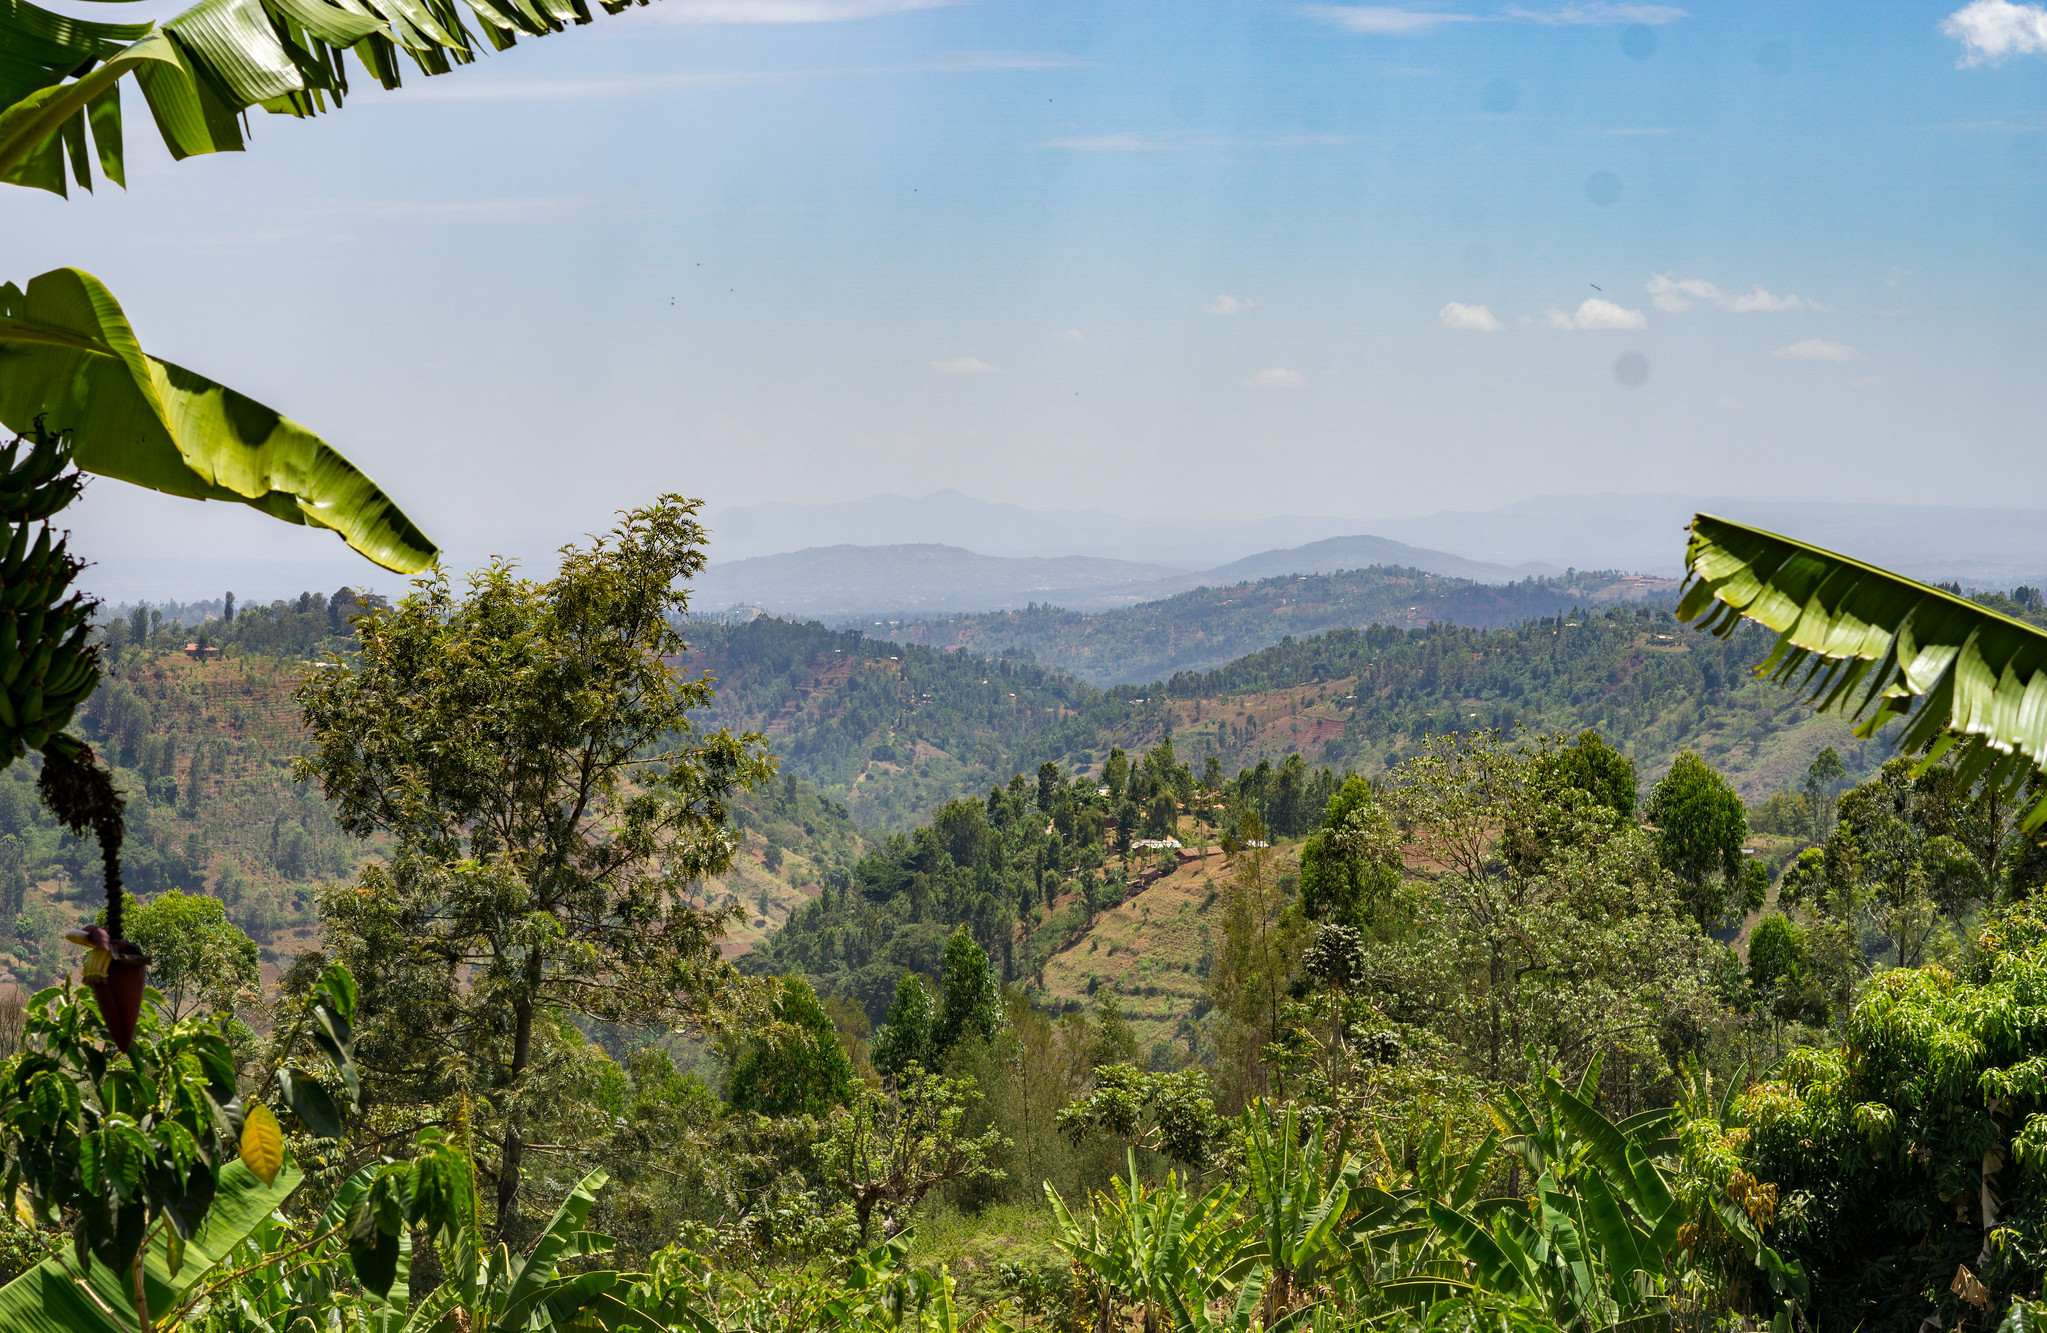 Central Kenya highlands, where coffee is growing at 1.600 to 1.800 masl